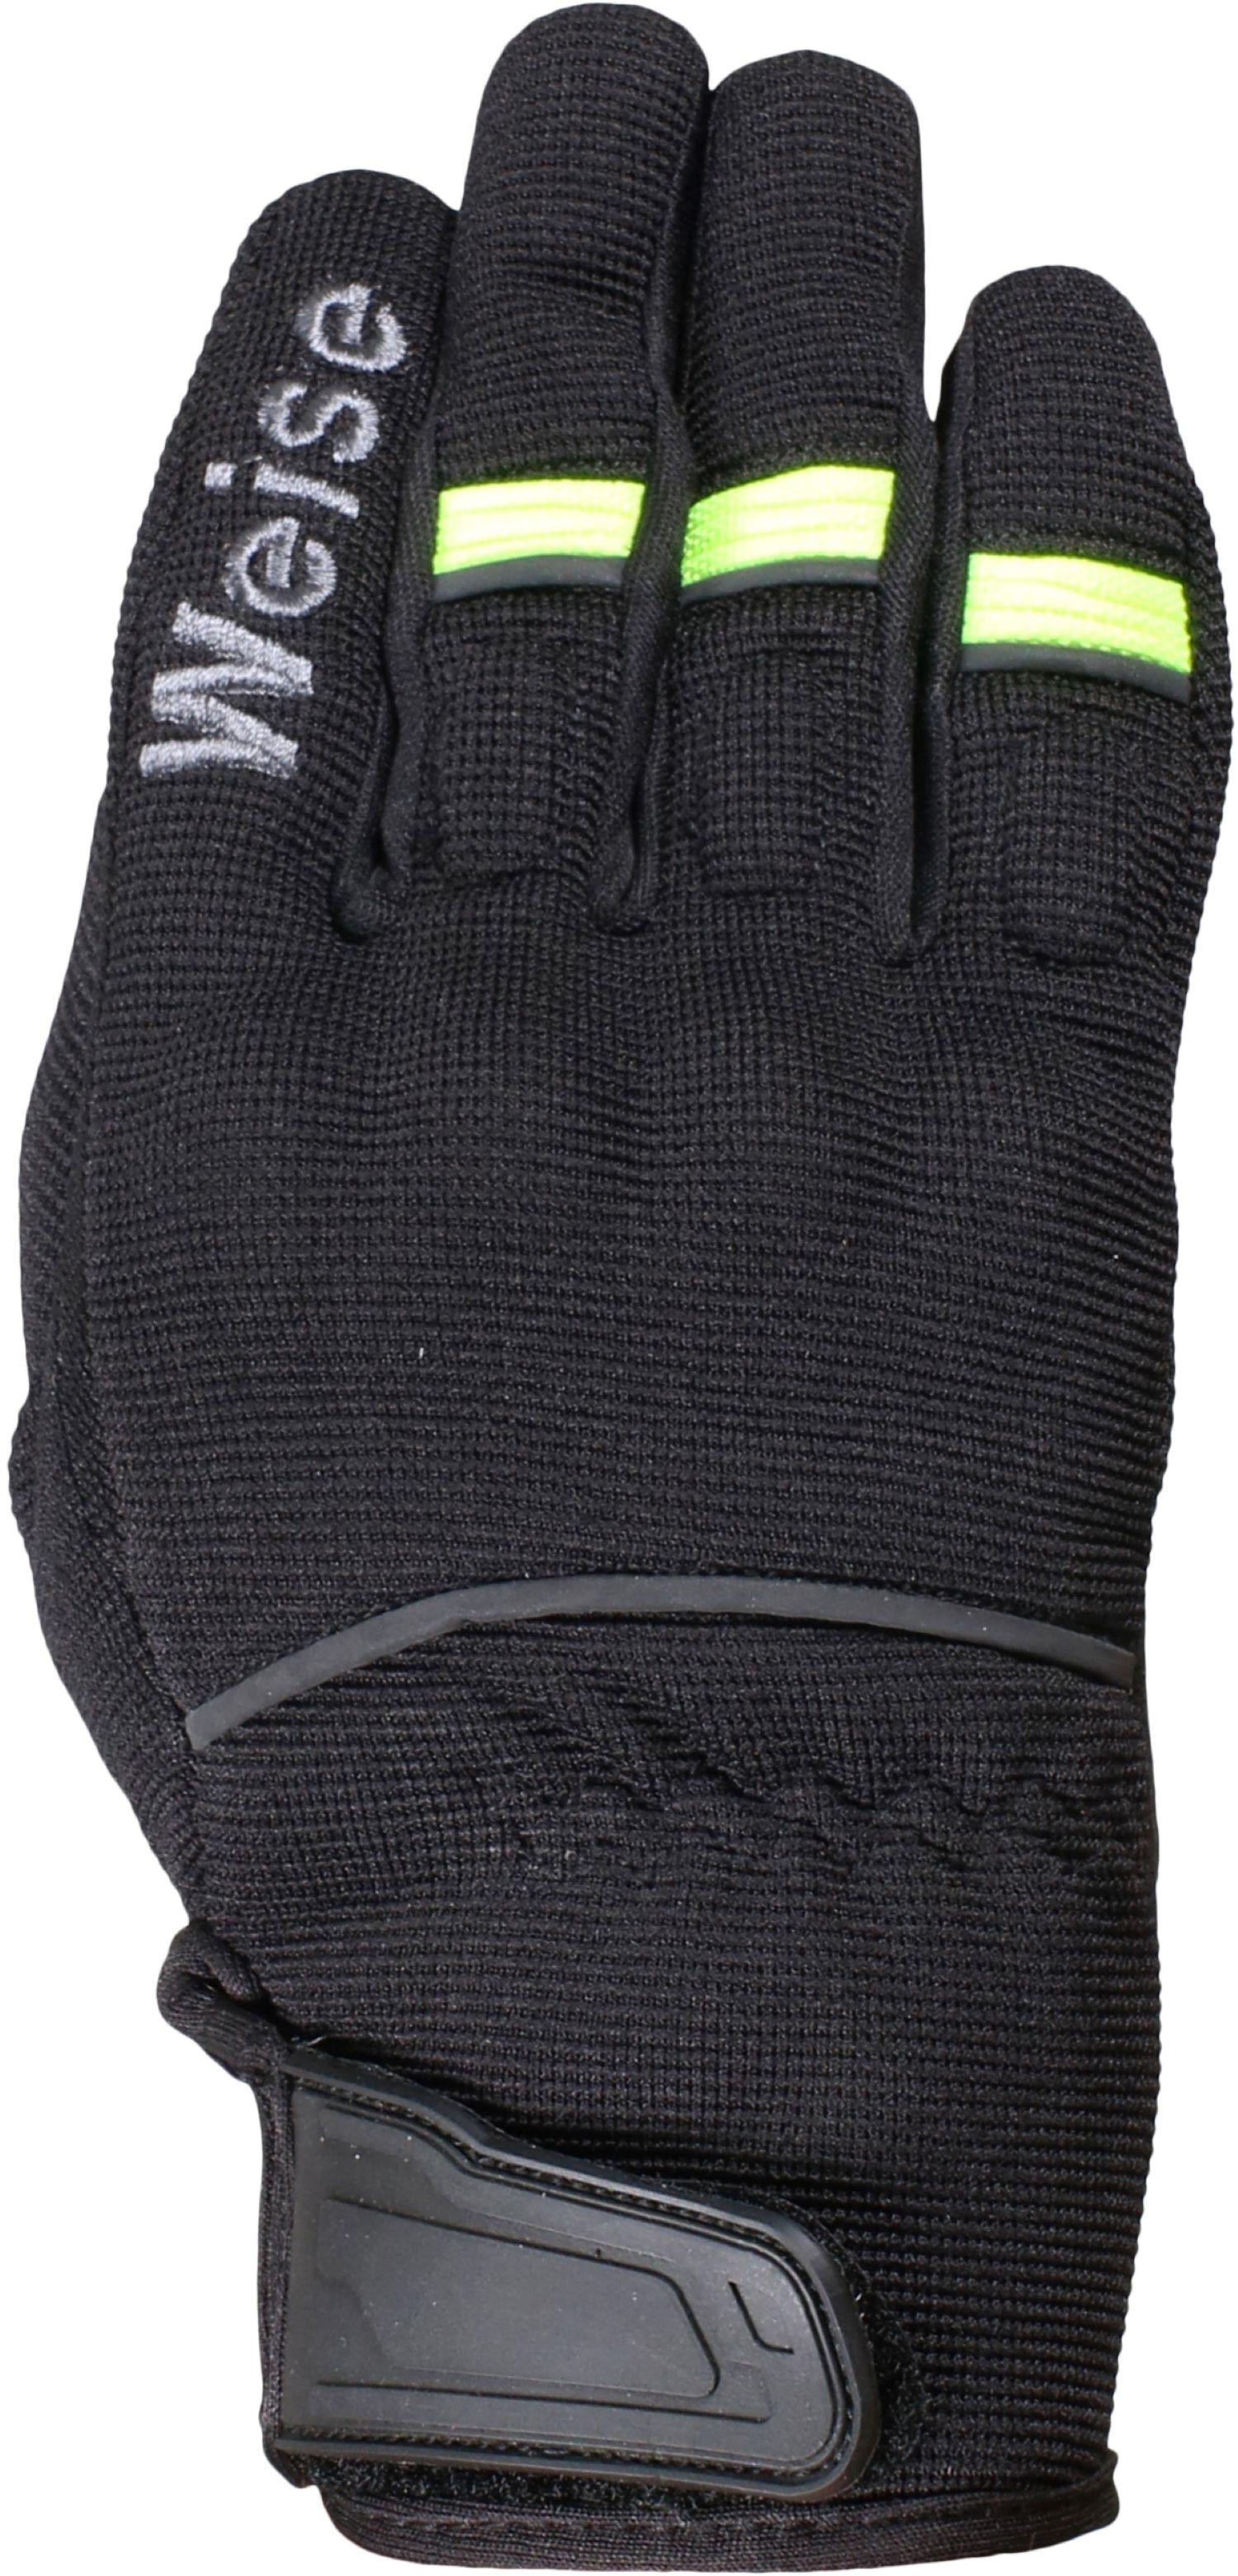 Weise Motorcycle Pit Gloves - Black/Neon, M